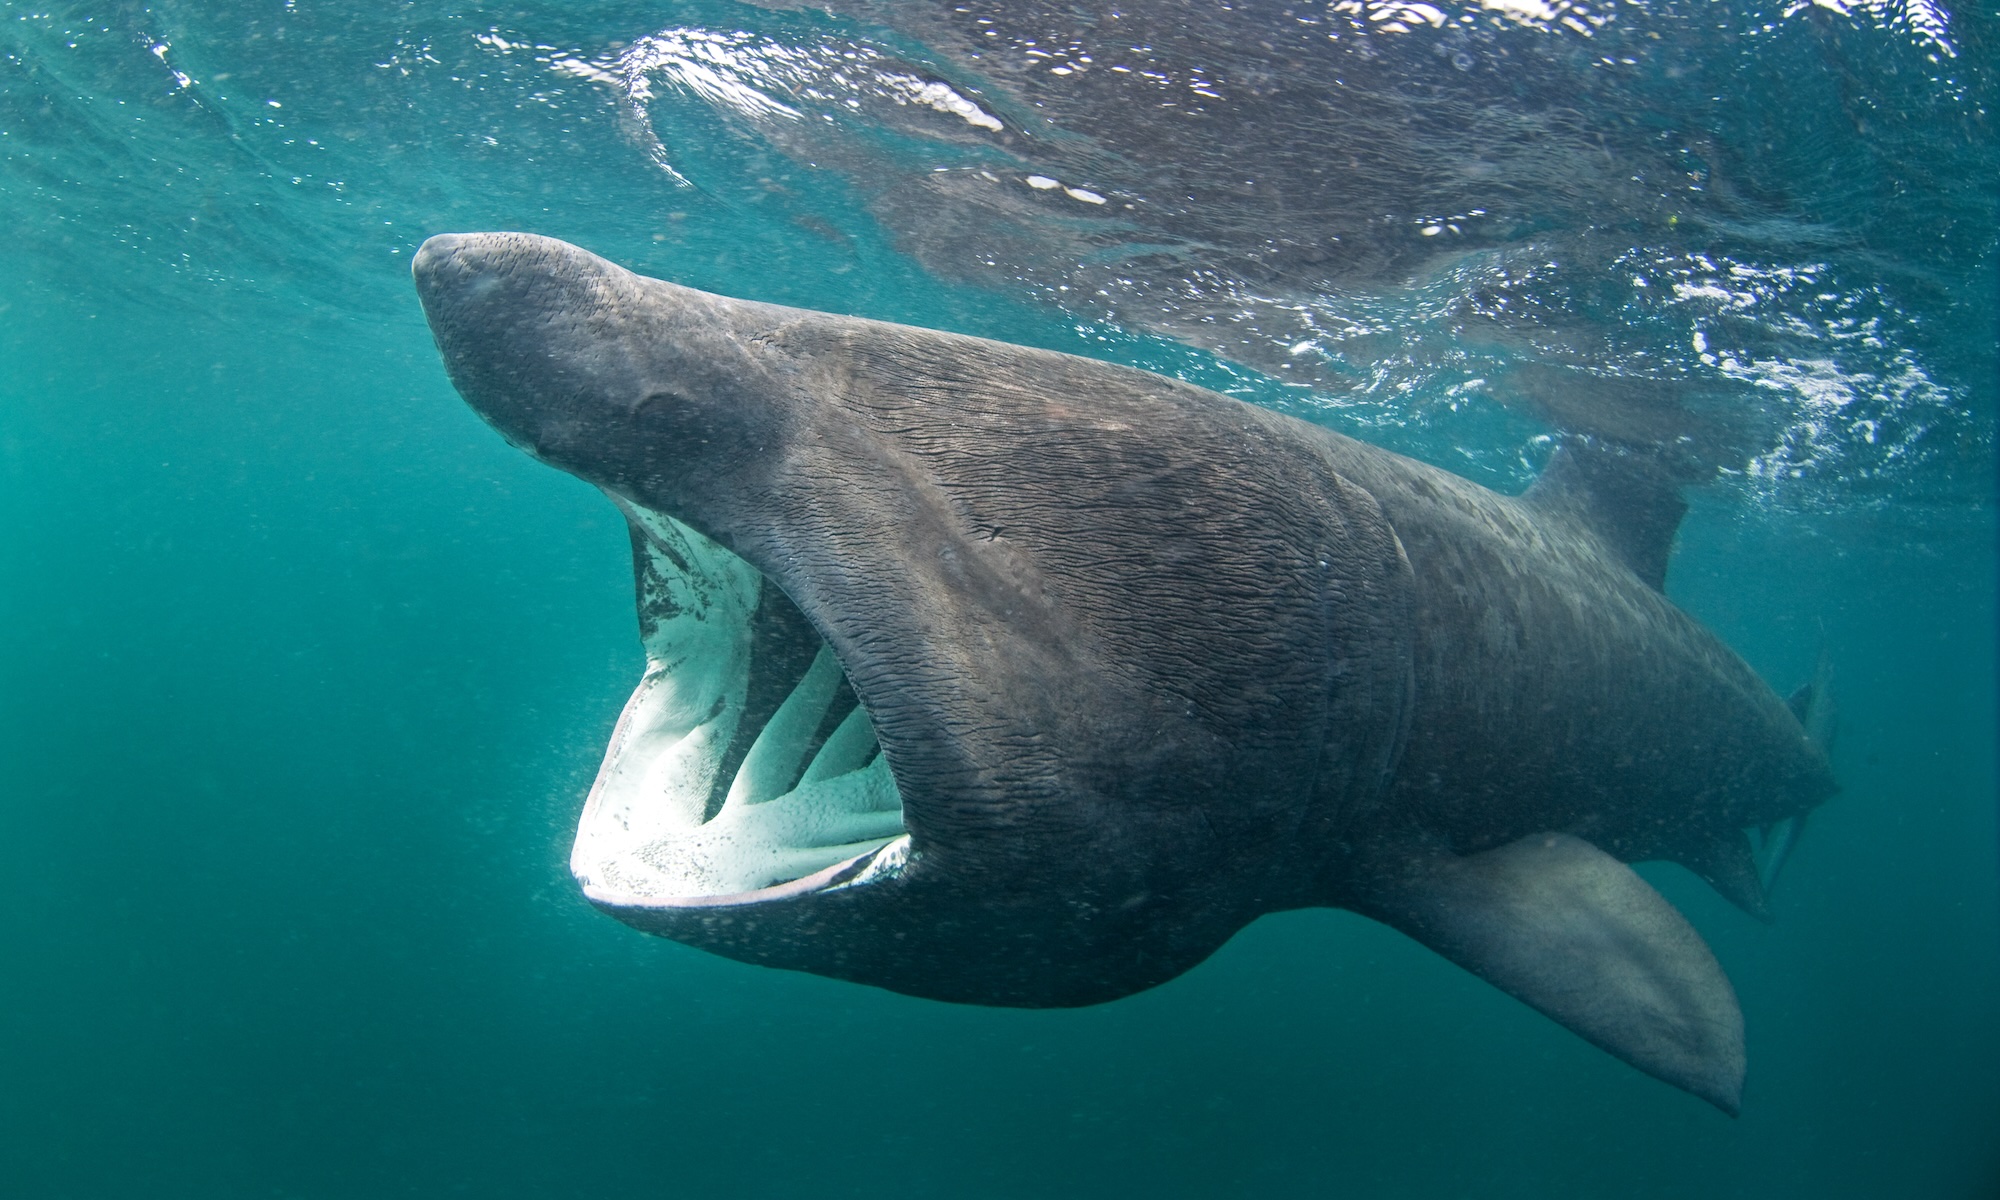 Underwater view of large shark with its mouth opened wide to filter feed.